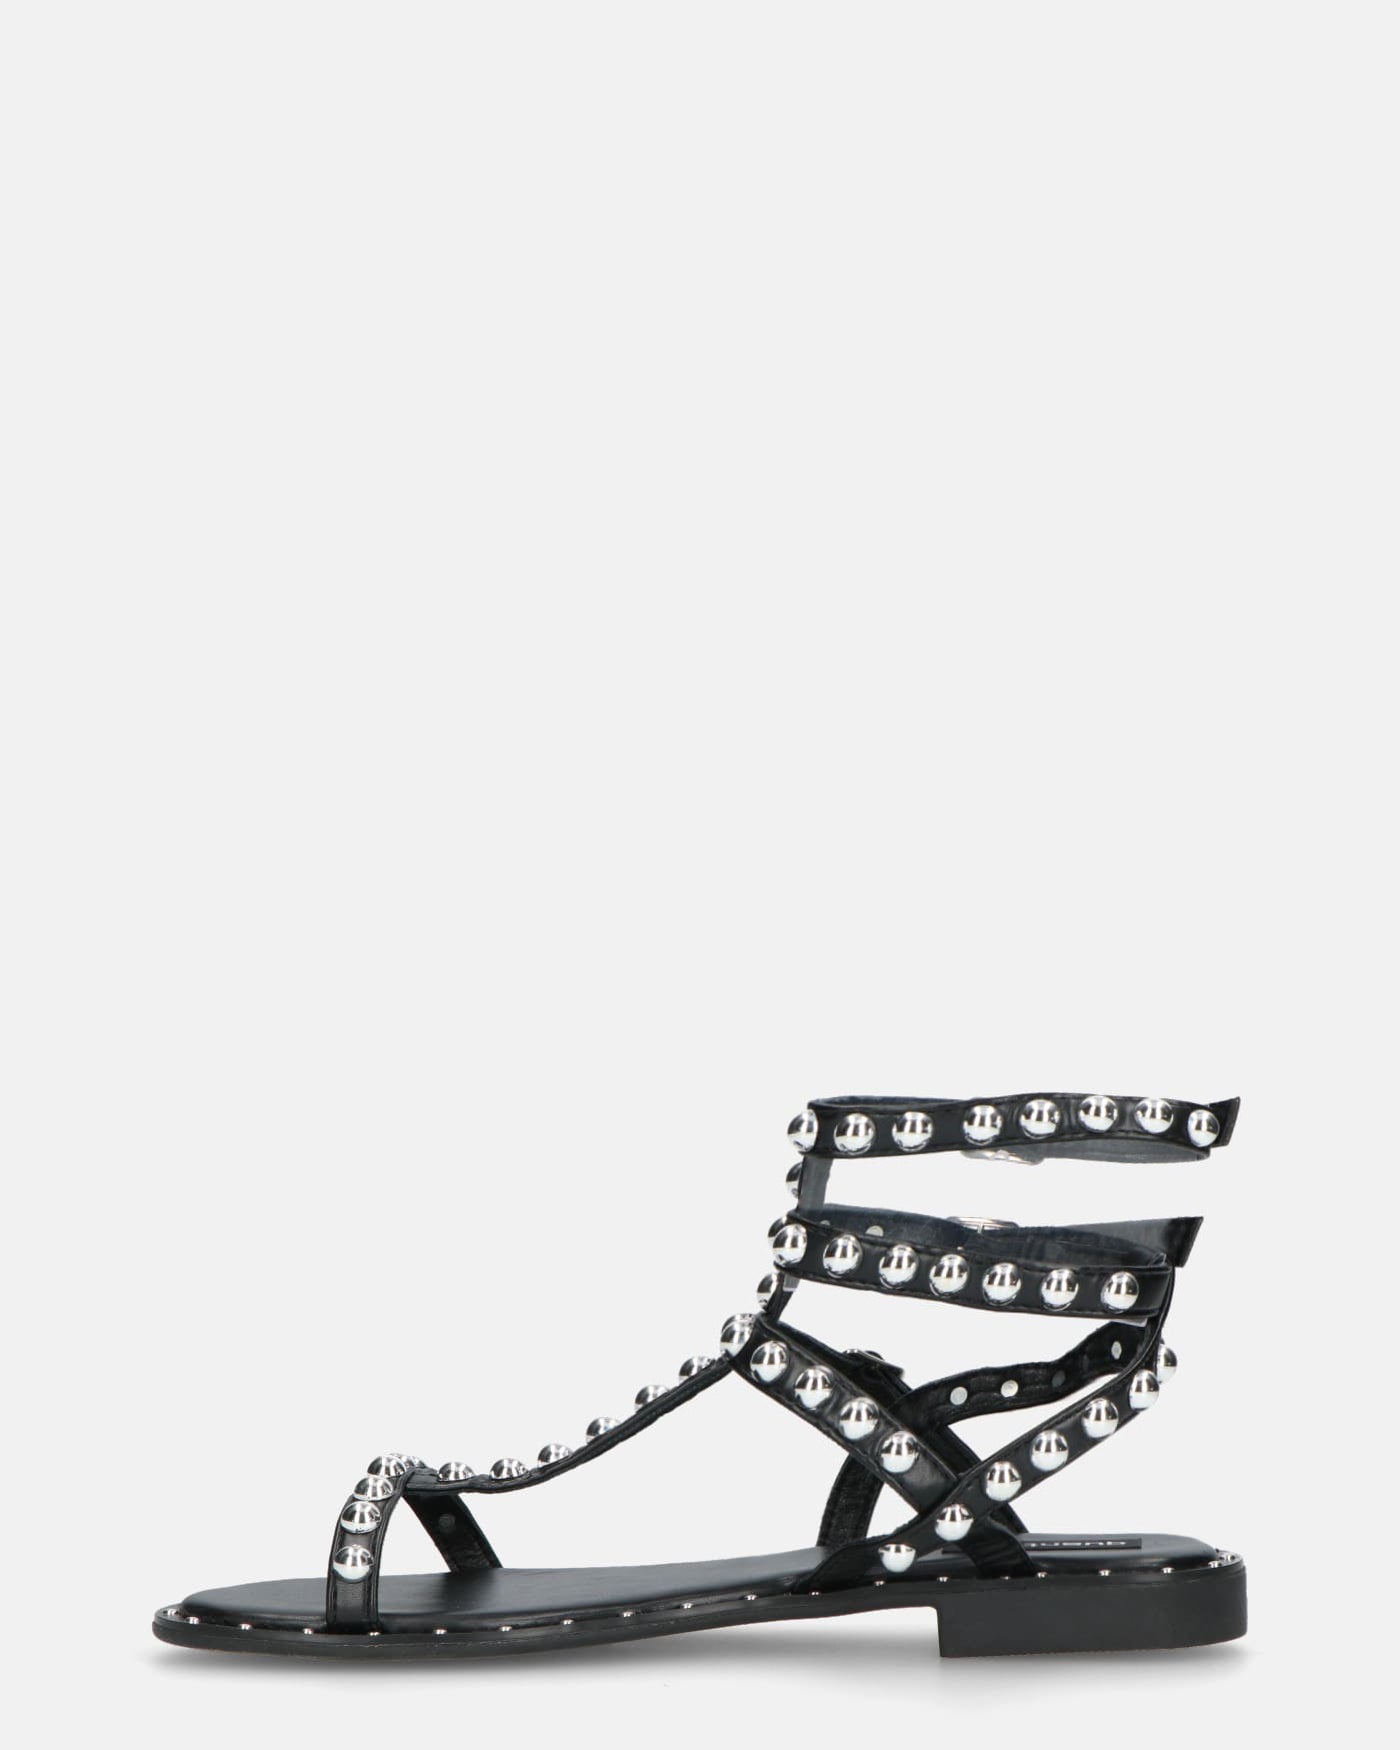 RILEY - black sandals with metal studs and straps